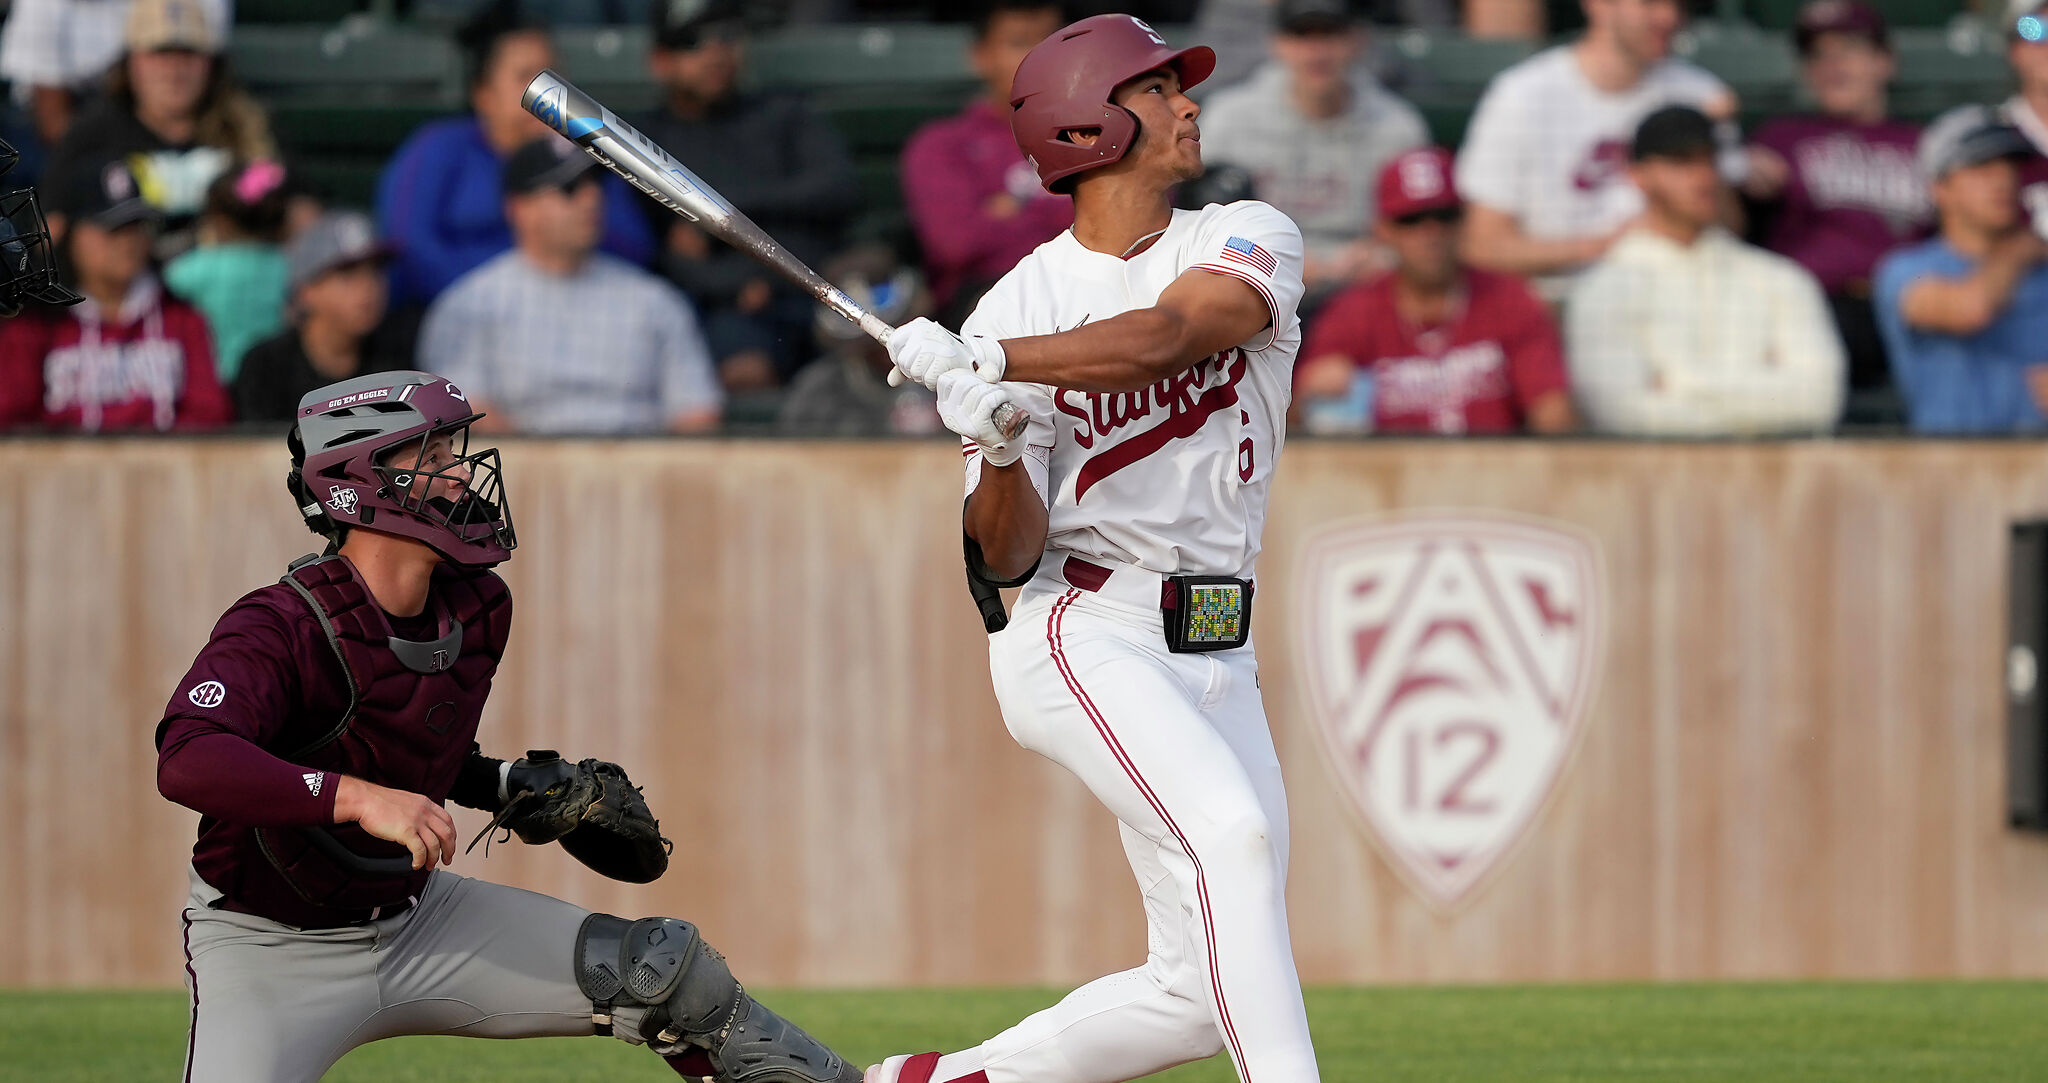 Texas A&M Aggies fall to Stanford Cardinal in regional title game